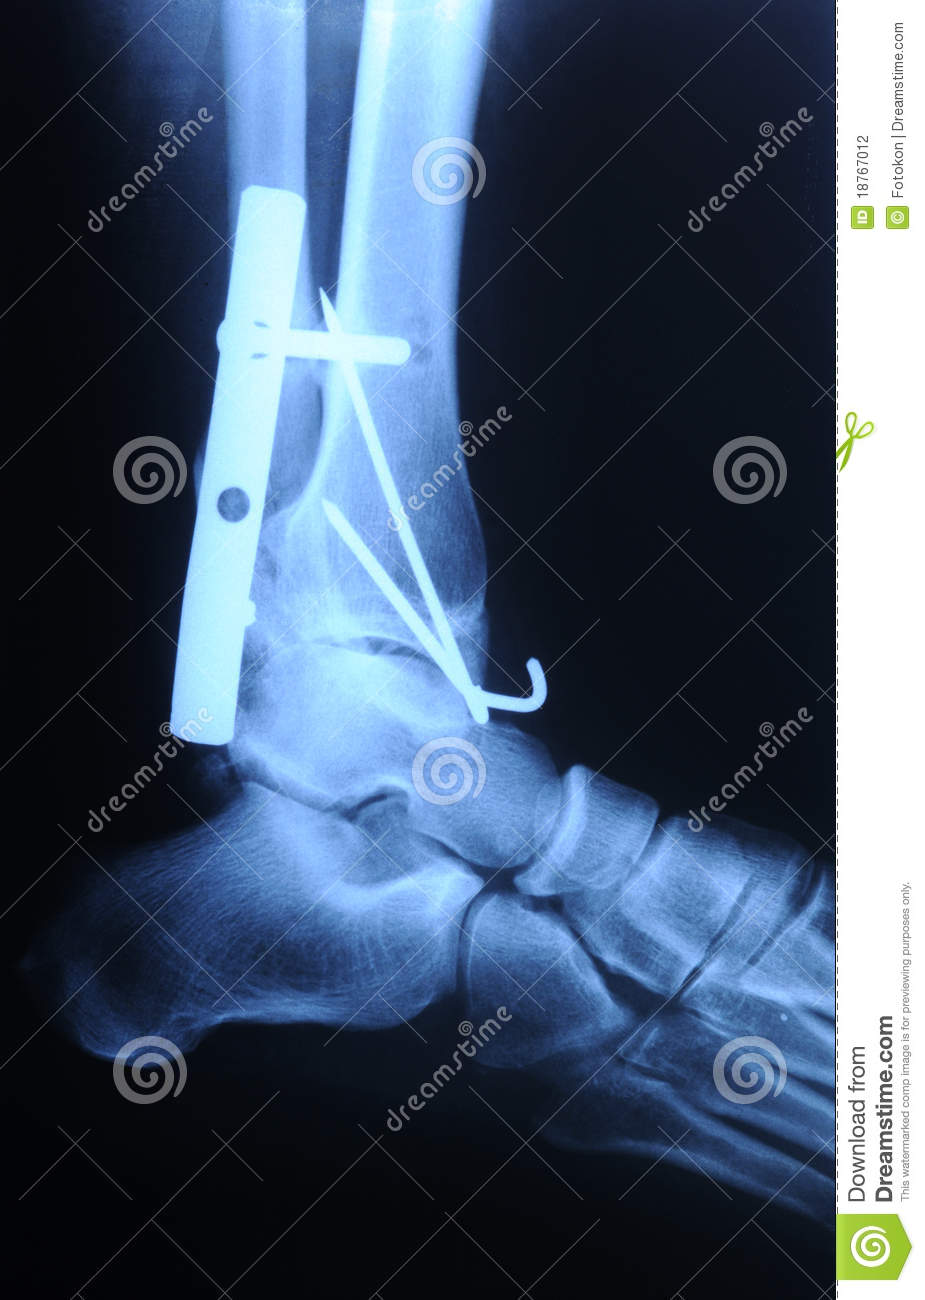 Radiograph Of Human Fracture Ankle Stock Photography   Image  18767012